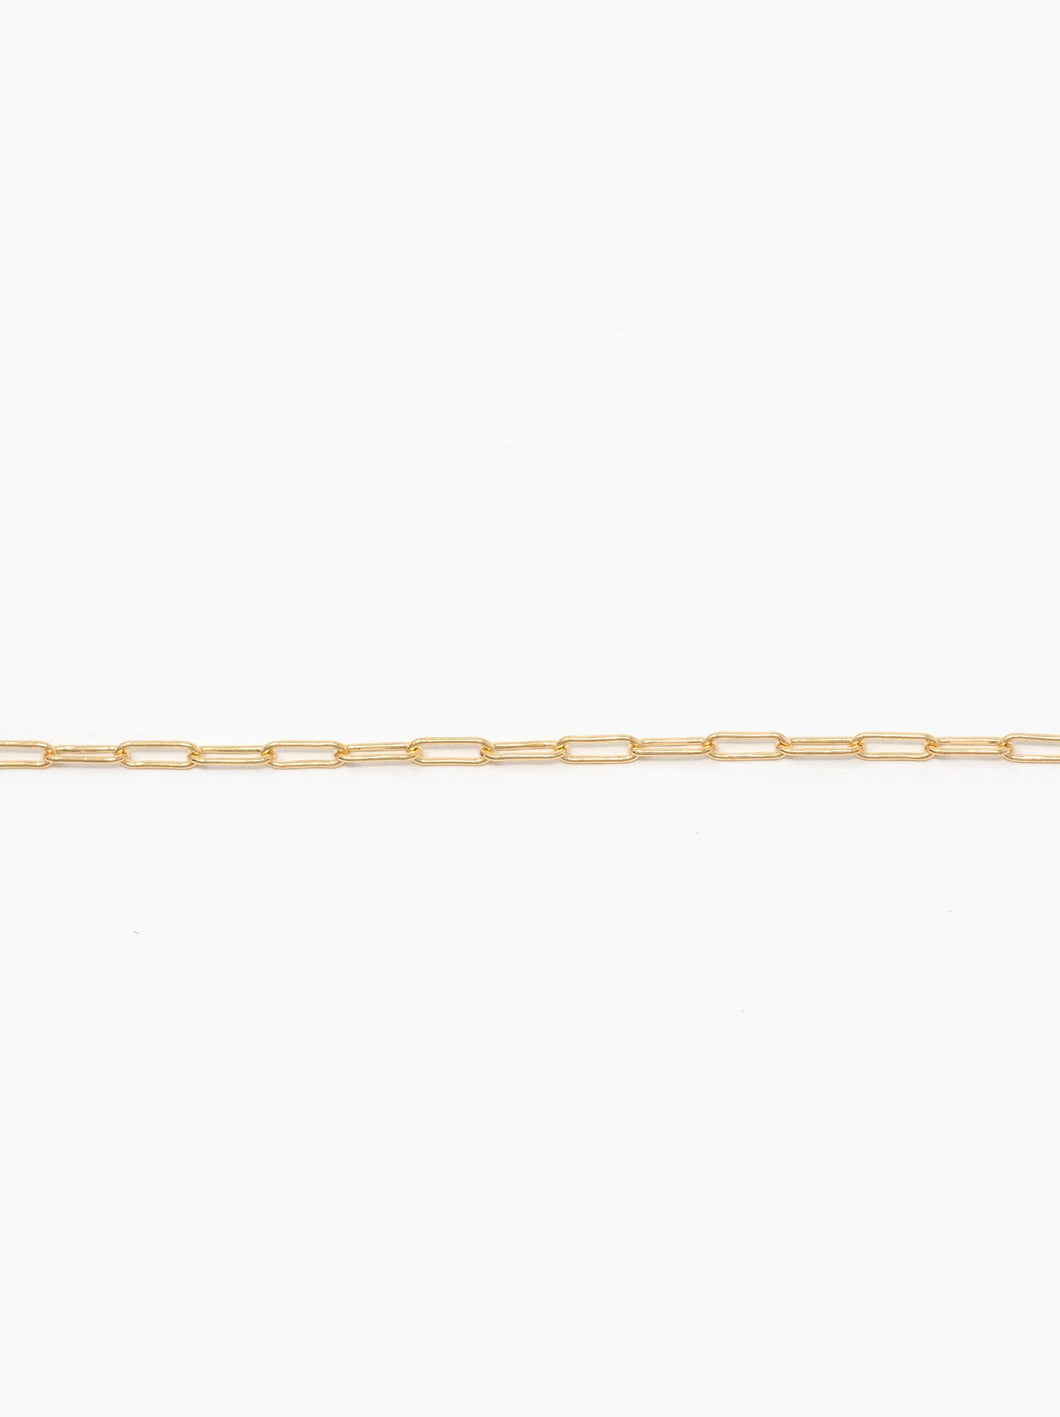 Essential Chain Bracelet 14k gold filled cable chain